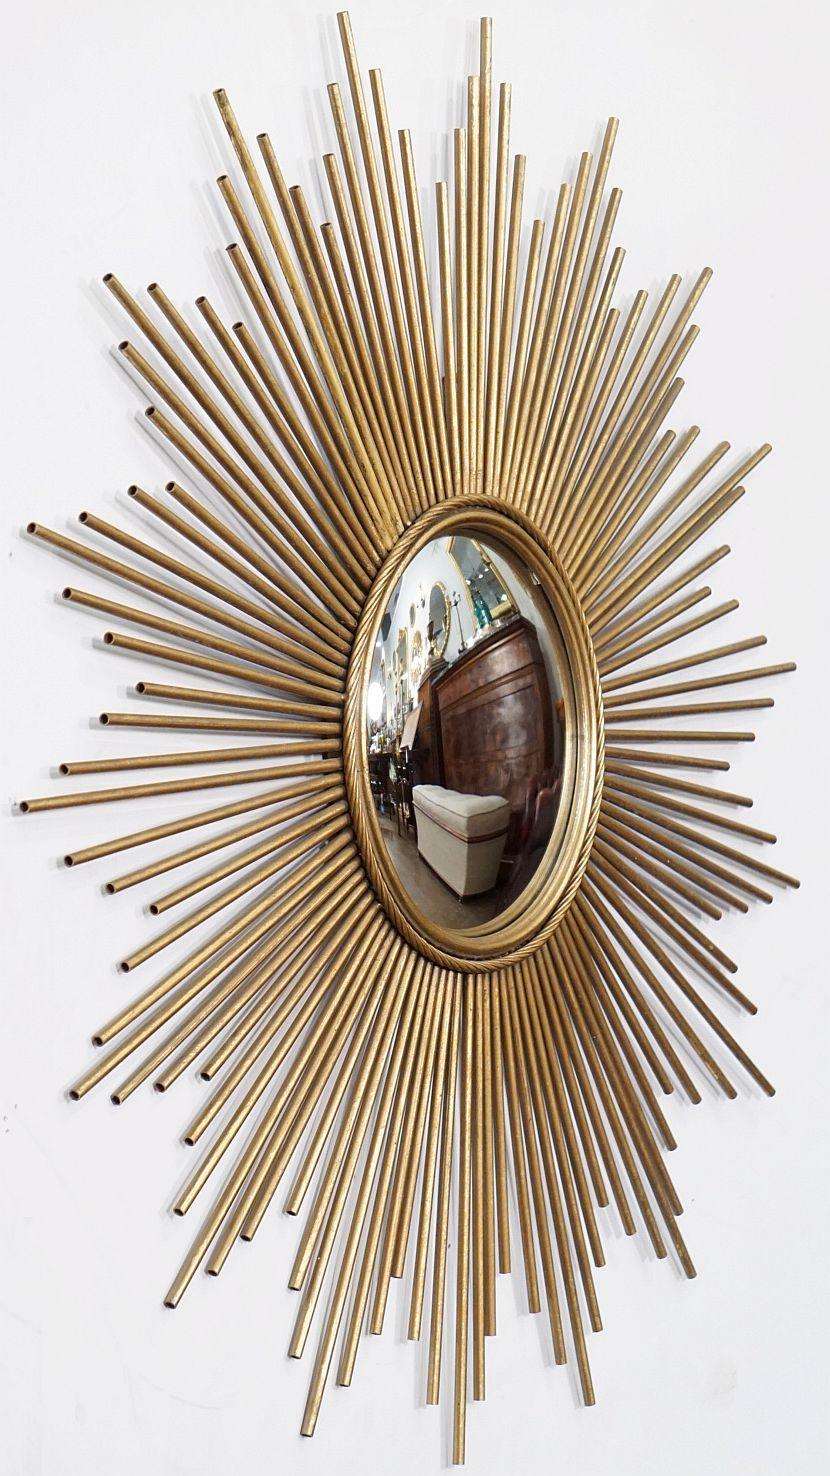 A fine French gilt metal sunburst (or starburst) mirror - 39 1/4 inches diameter - with convex mirrored glass center in moulded frame with rope motif trim by Chaty Vallauris.

Convex mirror diameter: 11 inches

The Chaty Vallauris starburst or